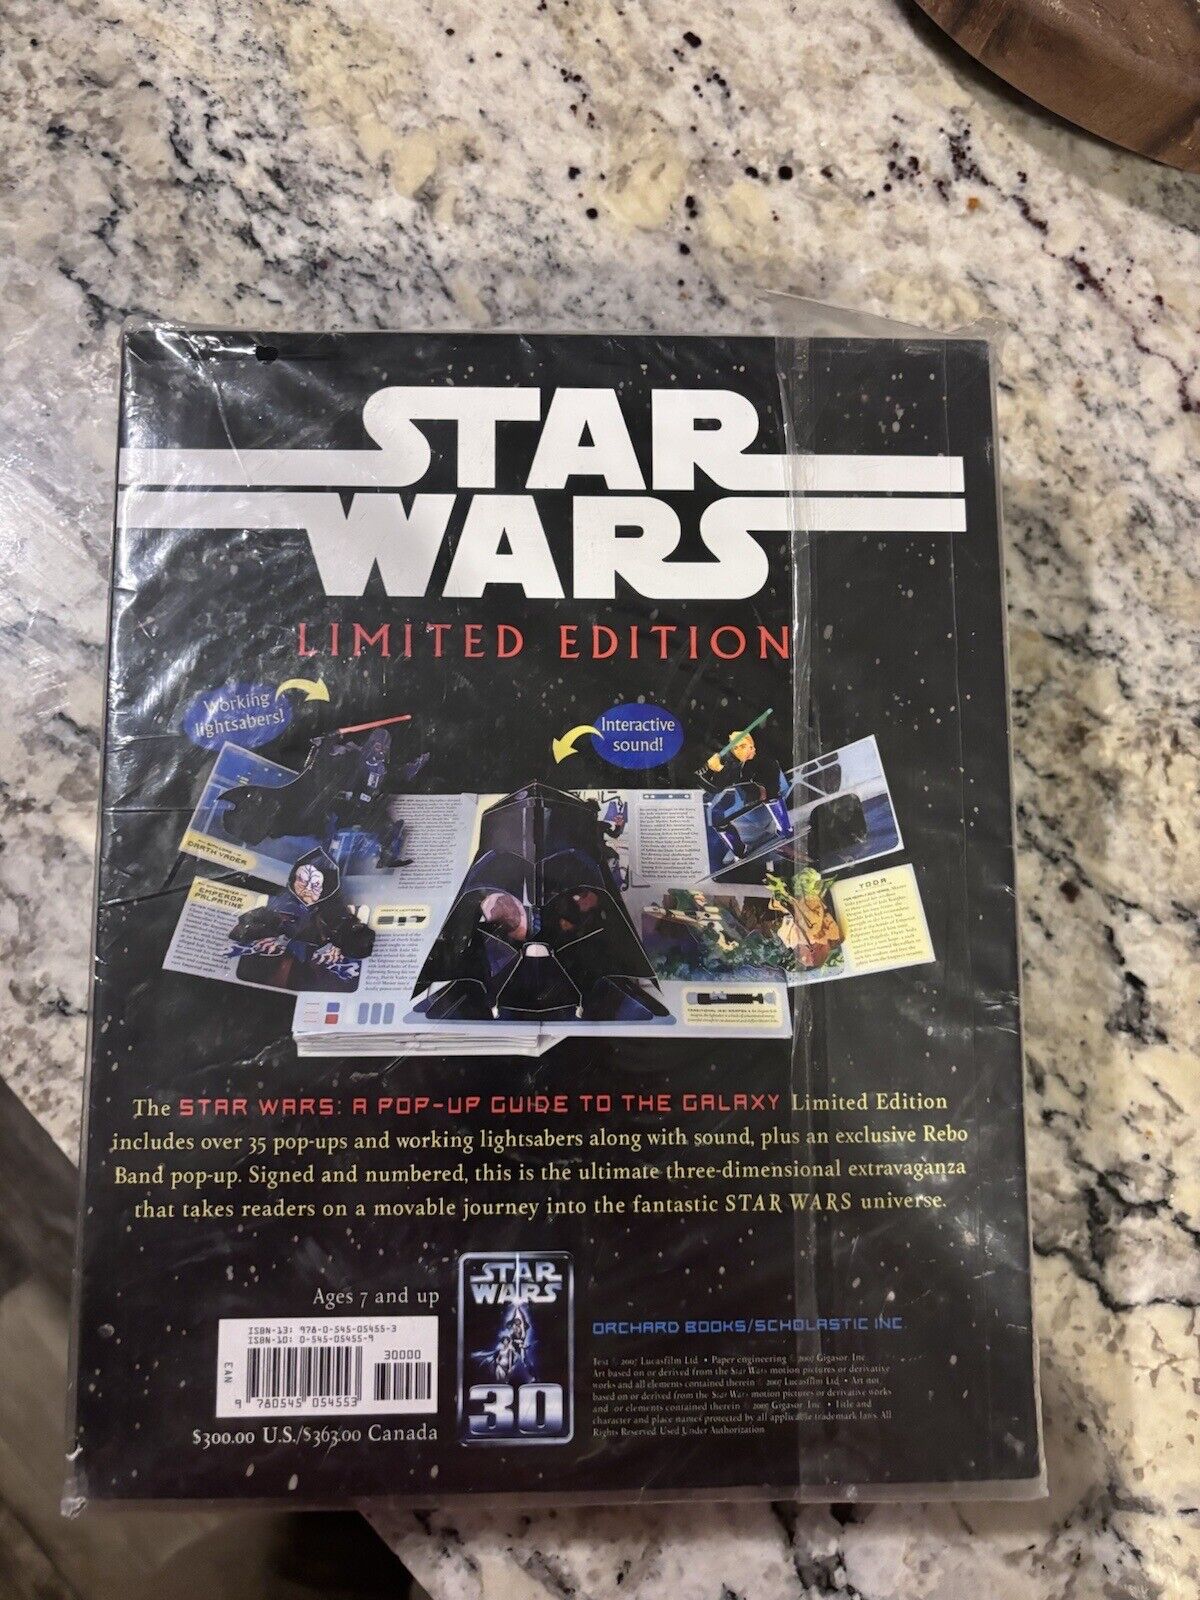 Star Wars: A Pop-Up Guide to the Galaxy by Matthew Reinhart **SIGNED**  1st ed.